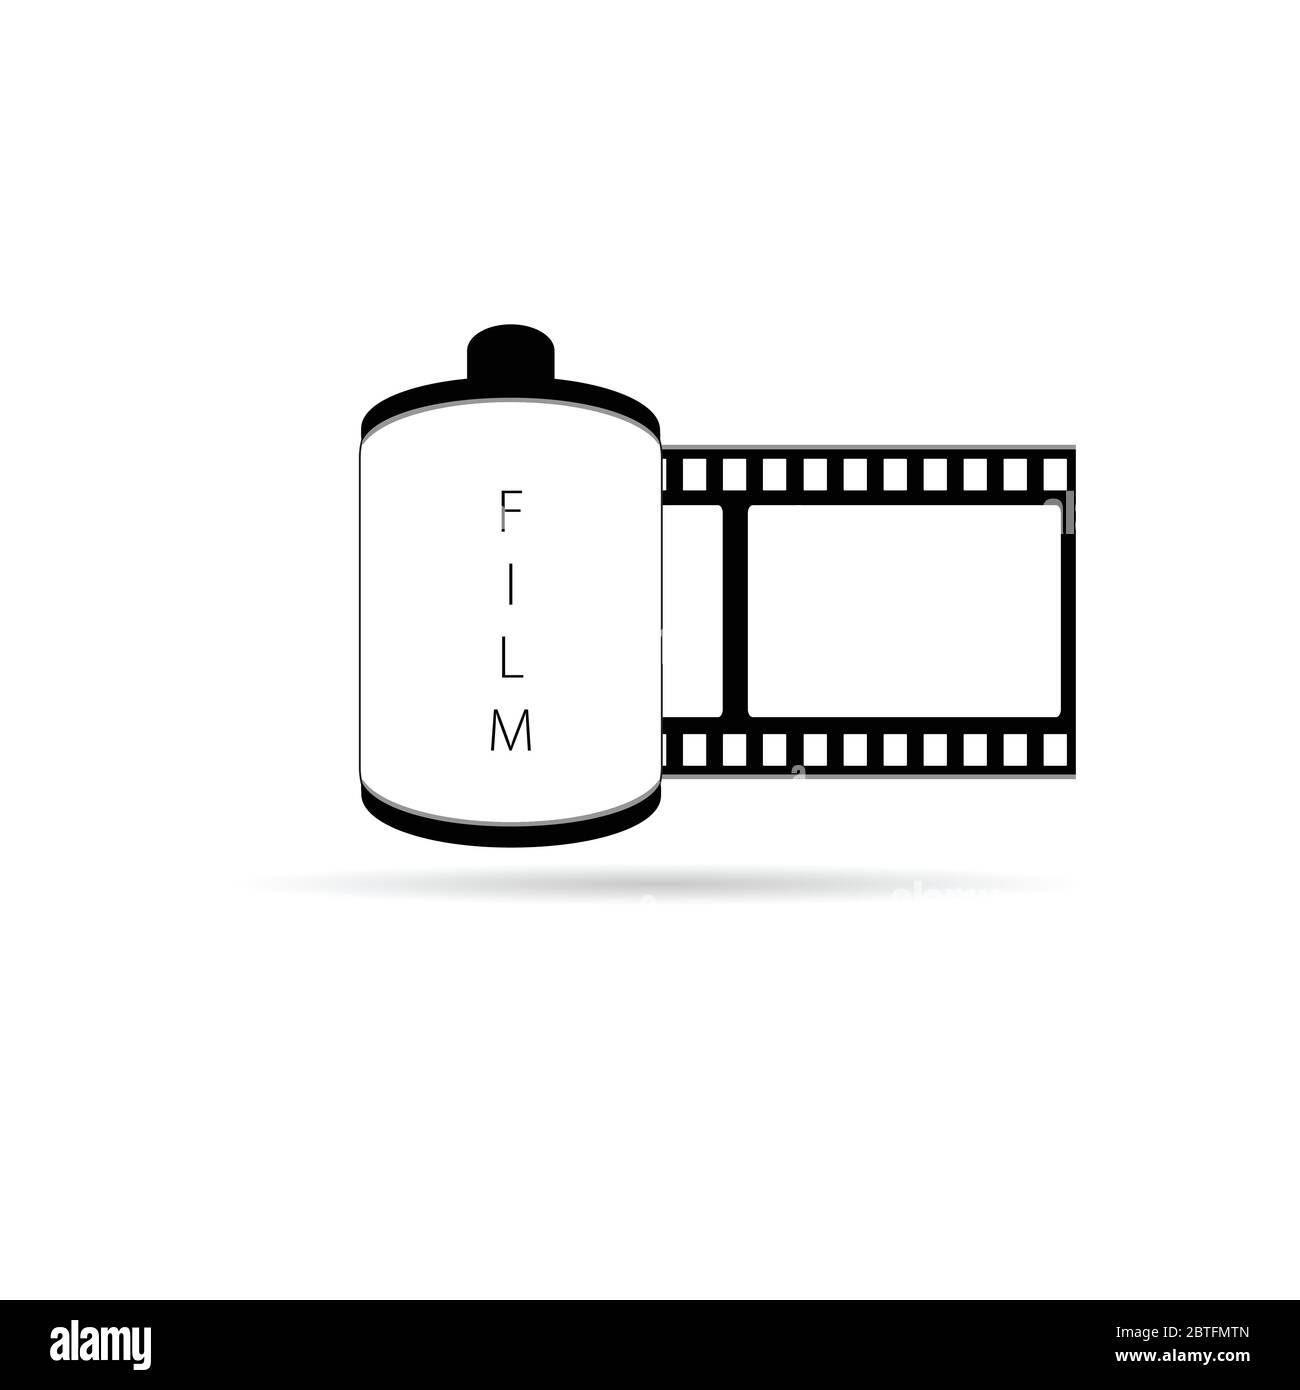 967 Mm Canister Film Roll Images, Stock Photos, 3D objects, & Vectors